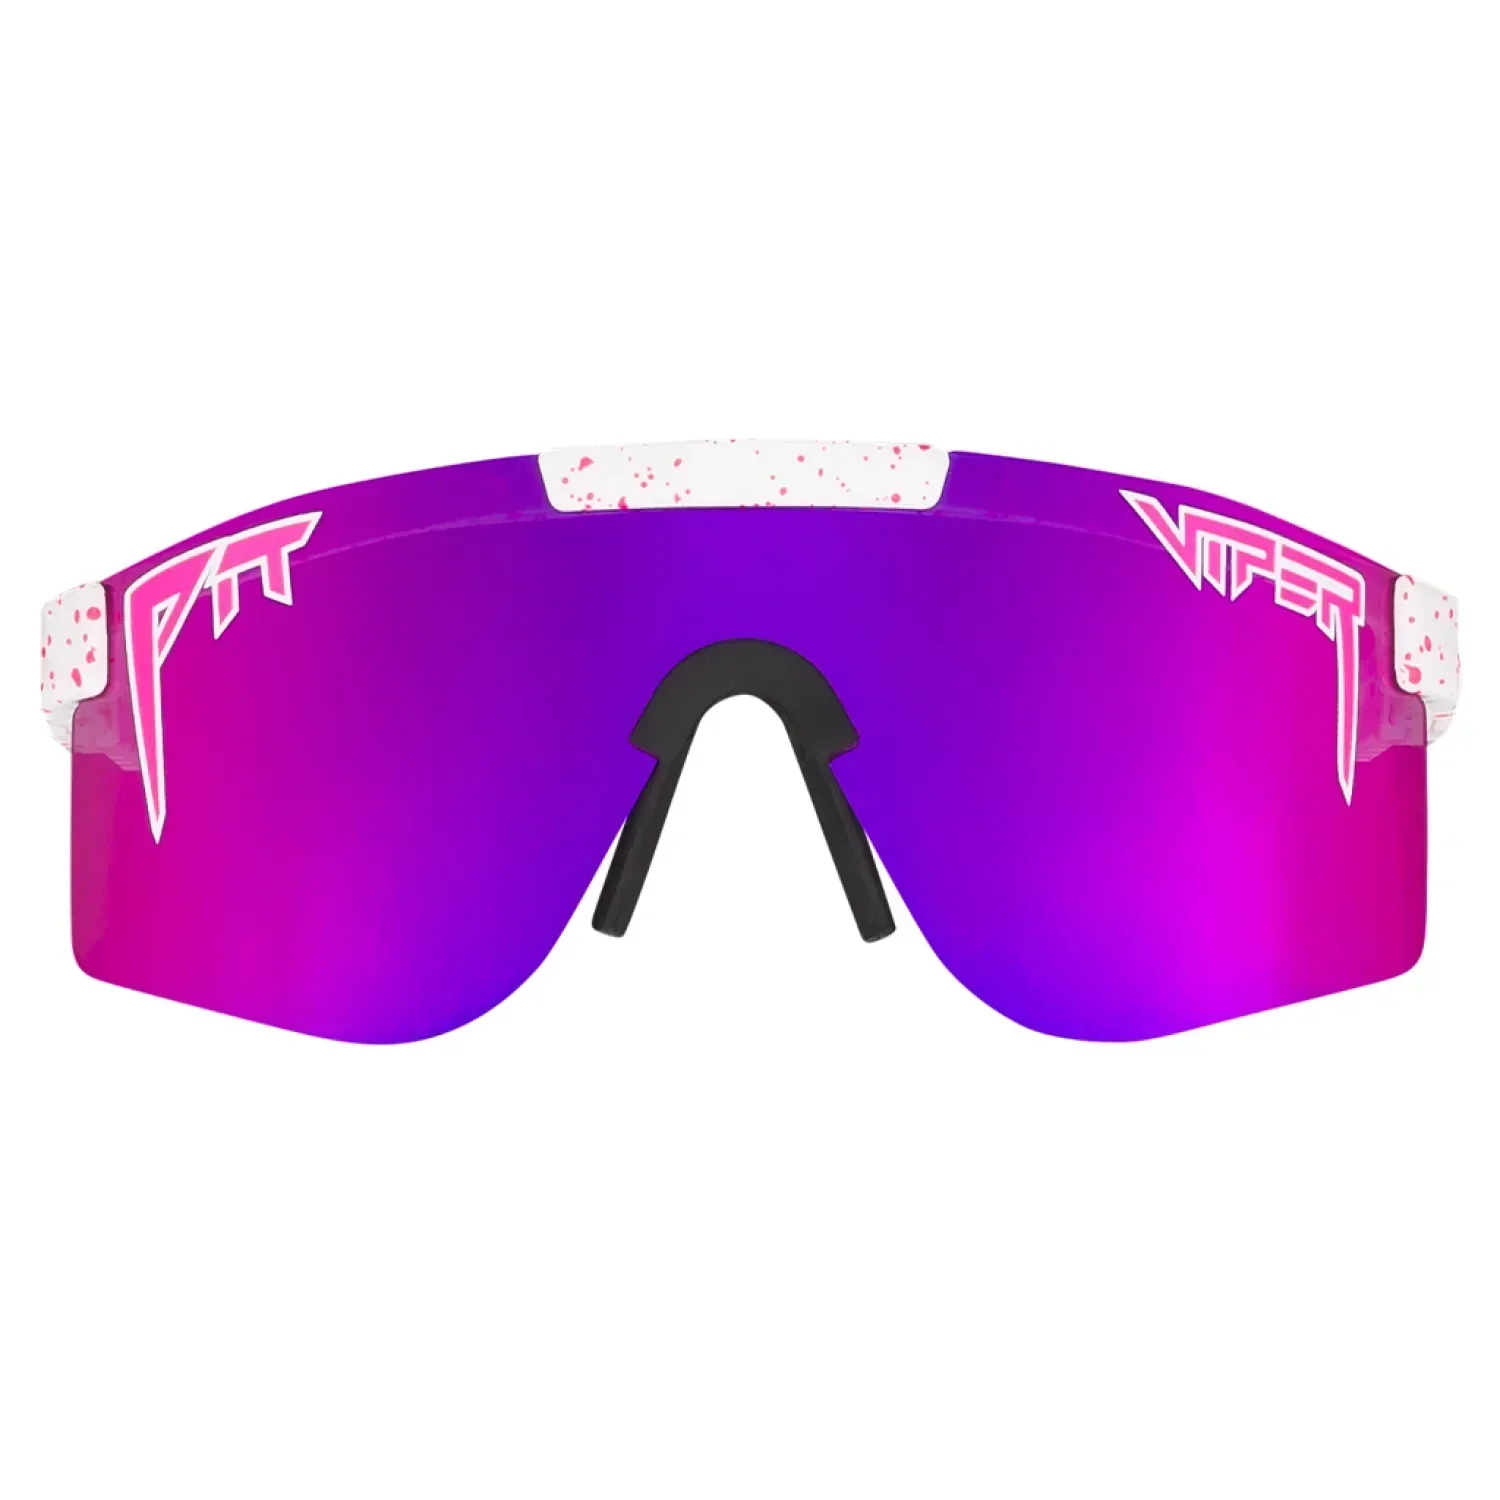 Pit Viper 07. EYEWEAR - SUNGLASSES - SUNGLASSES The Double Wides THE ABSOLUTE FREEDOM POLARIZED